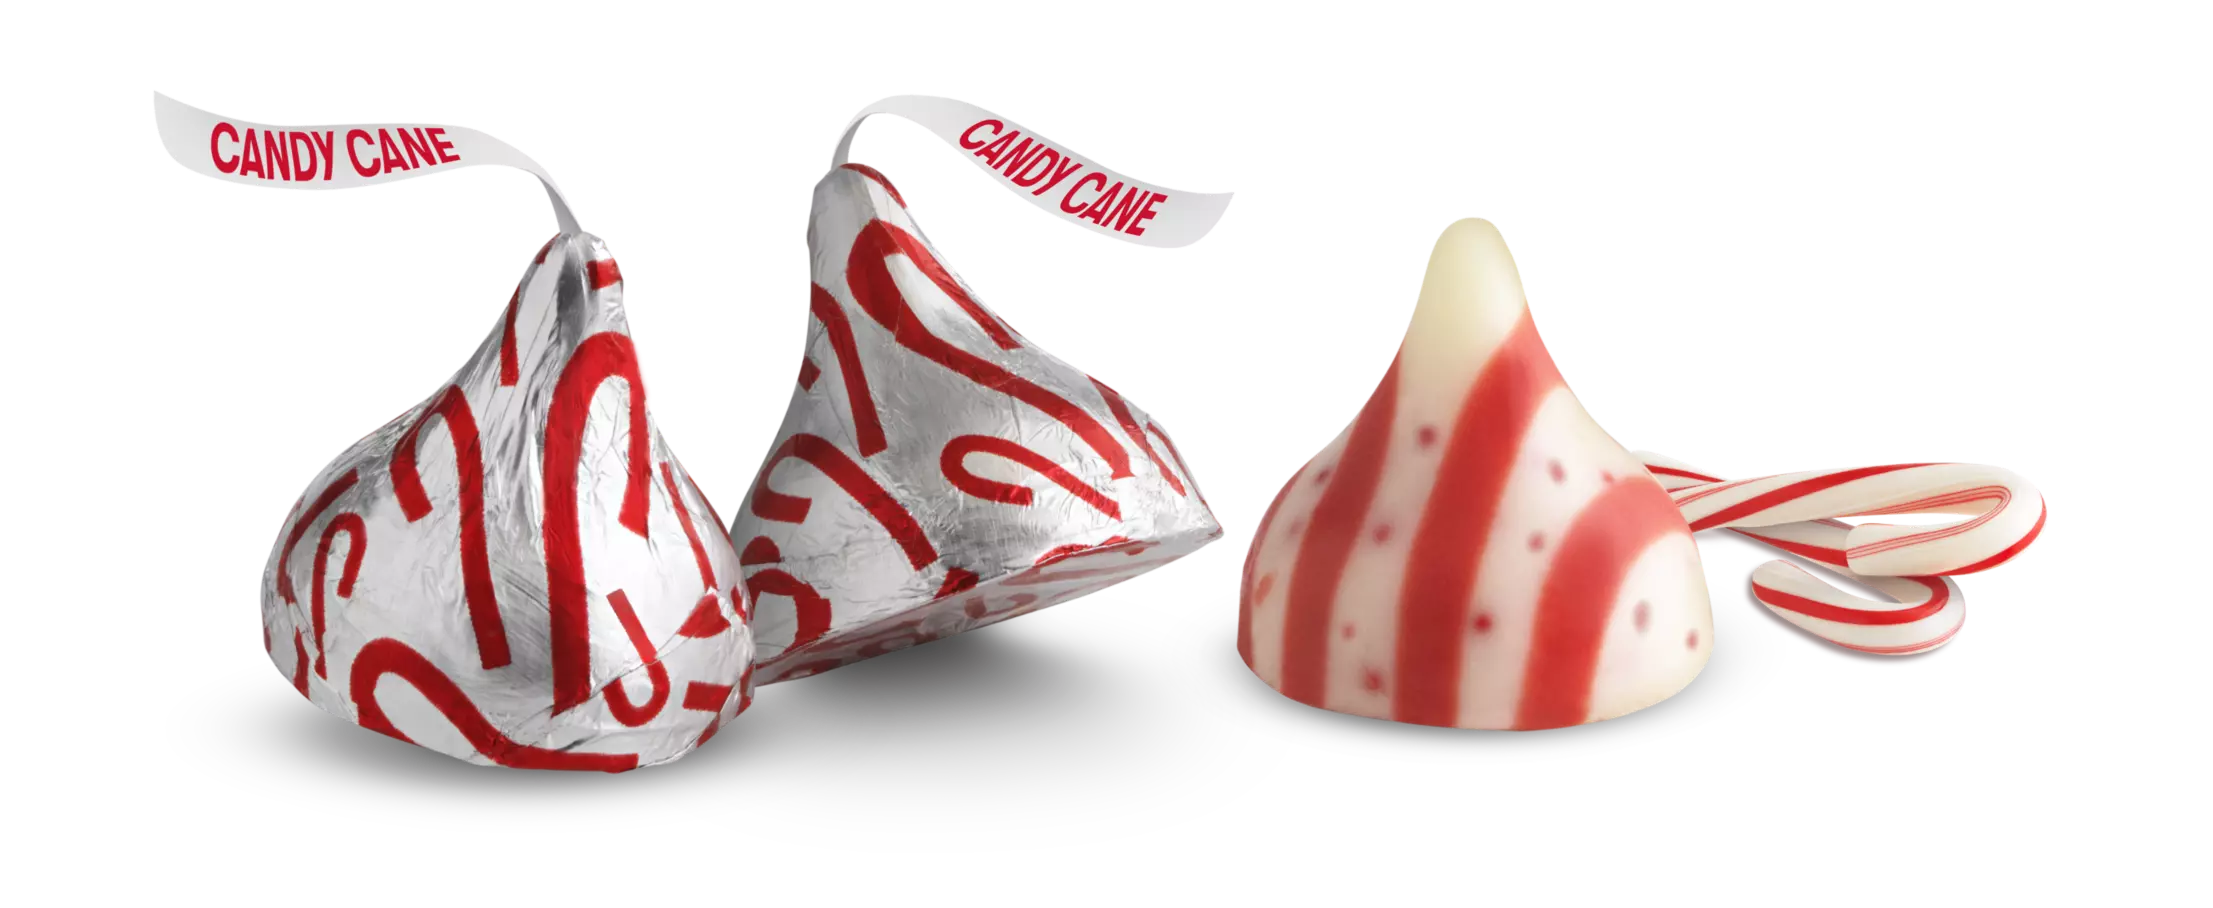 HERSHEY'S KISSES Candy Cane Flavored Mint Candy, 2.08 oz cane - Out of Package